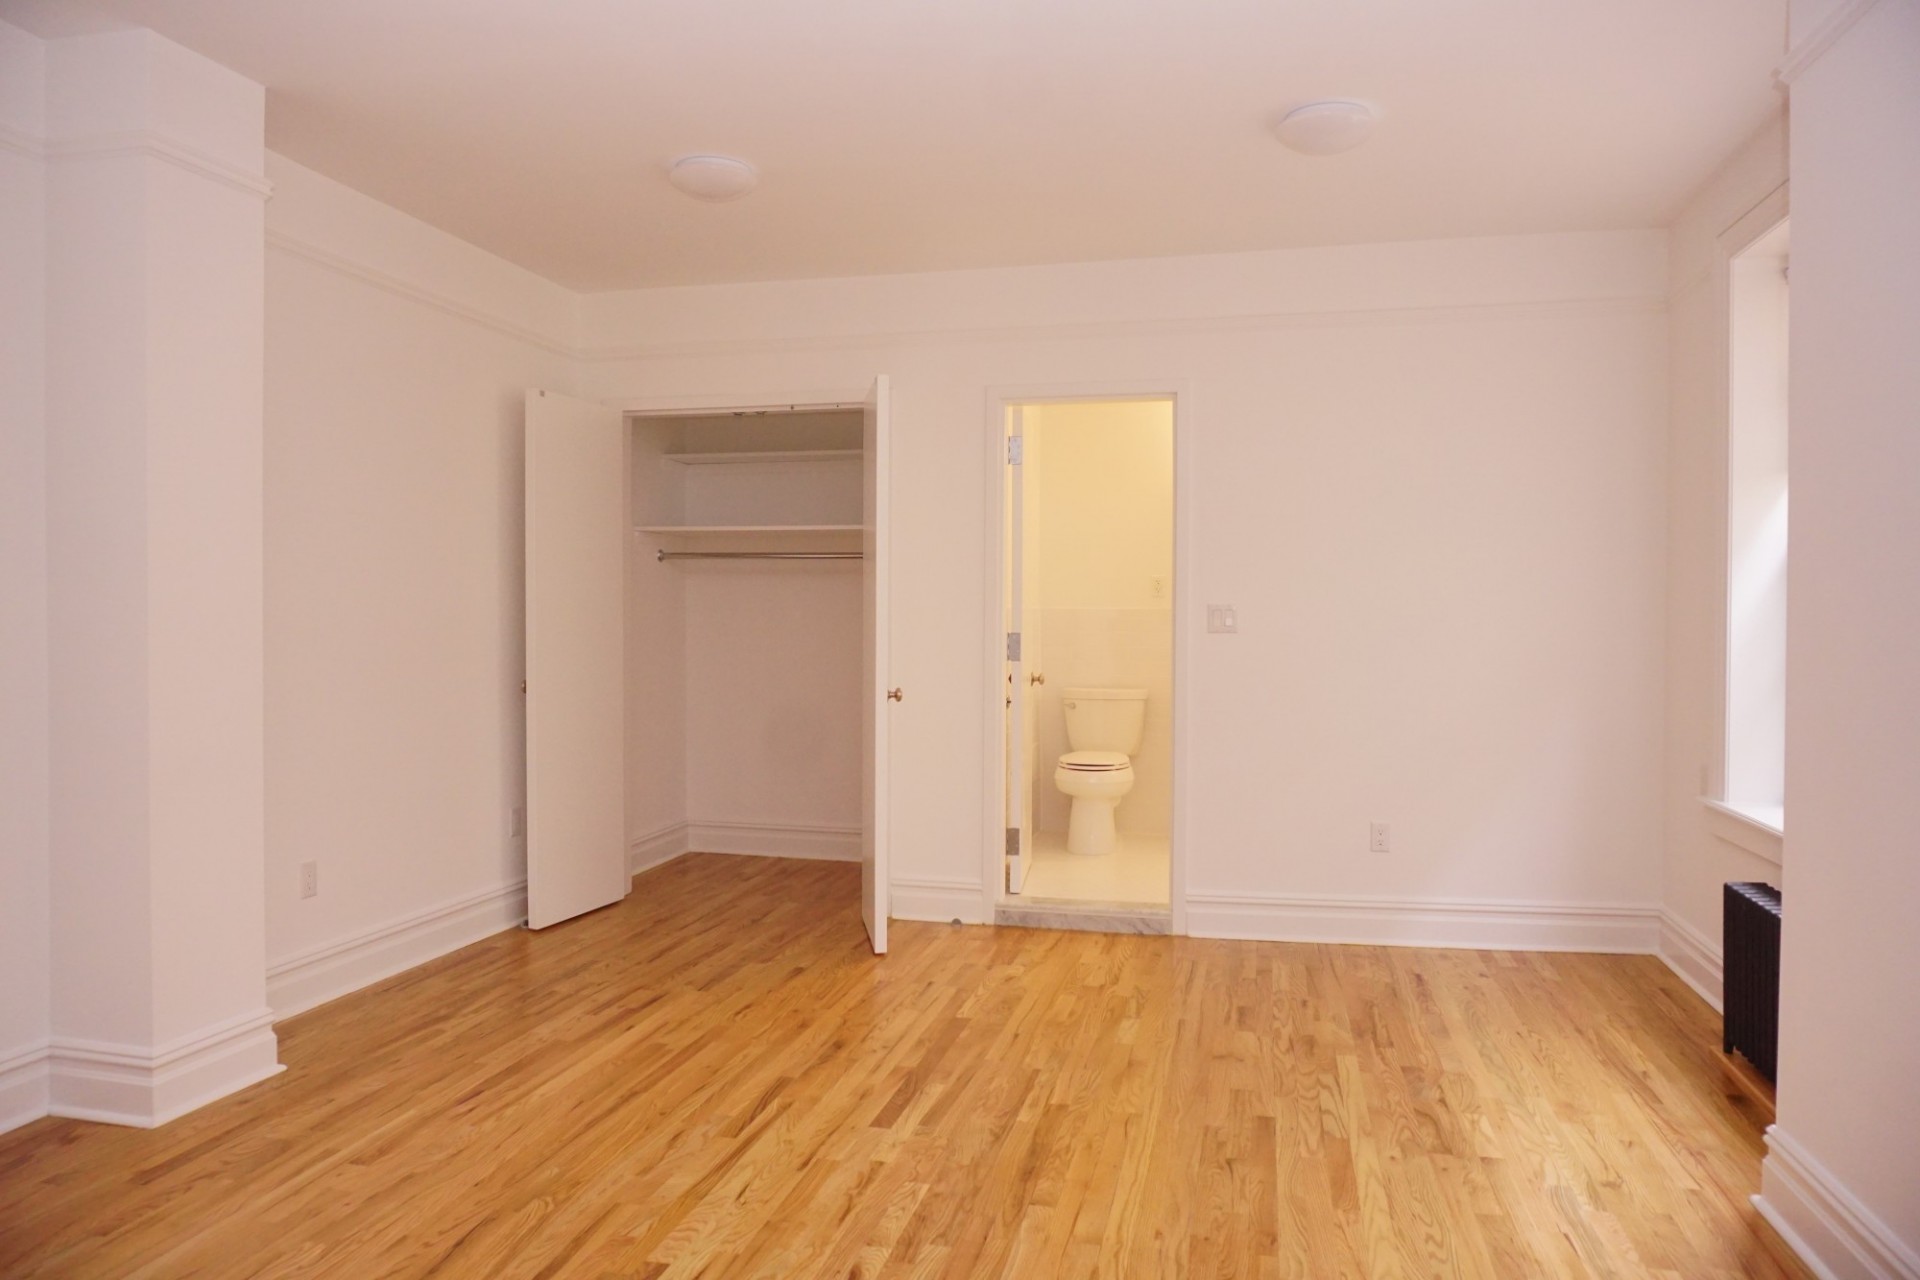 Example of a studio apartment - closet, living space and bathroom view